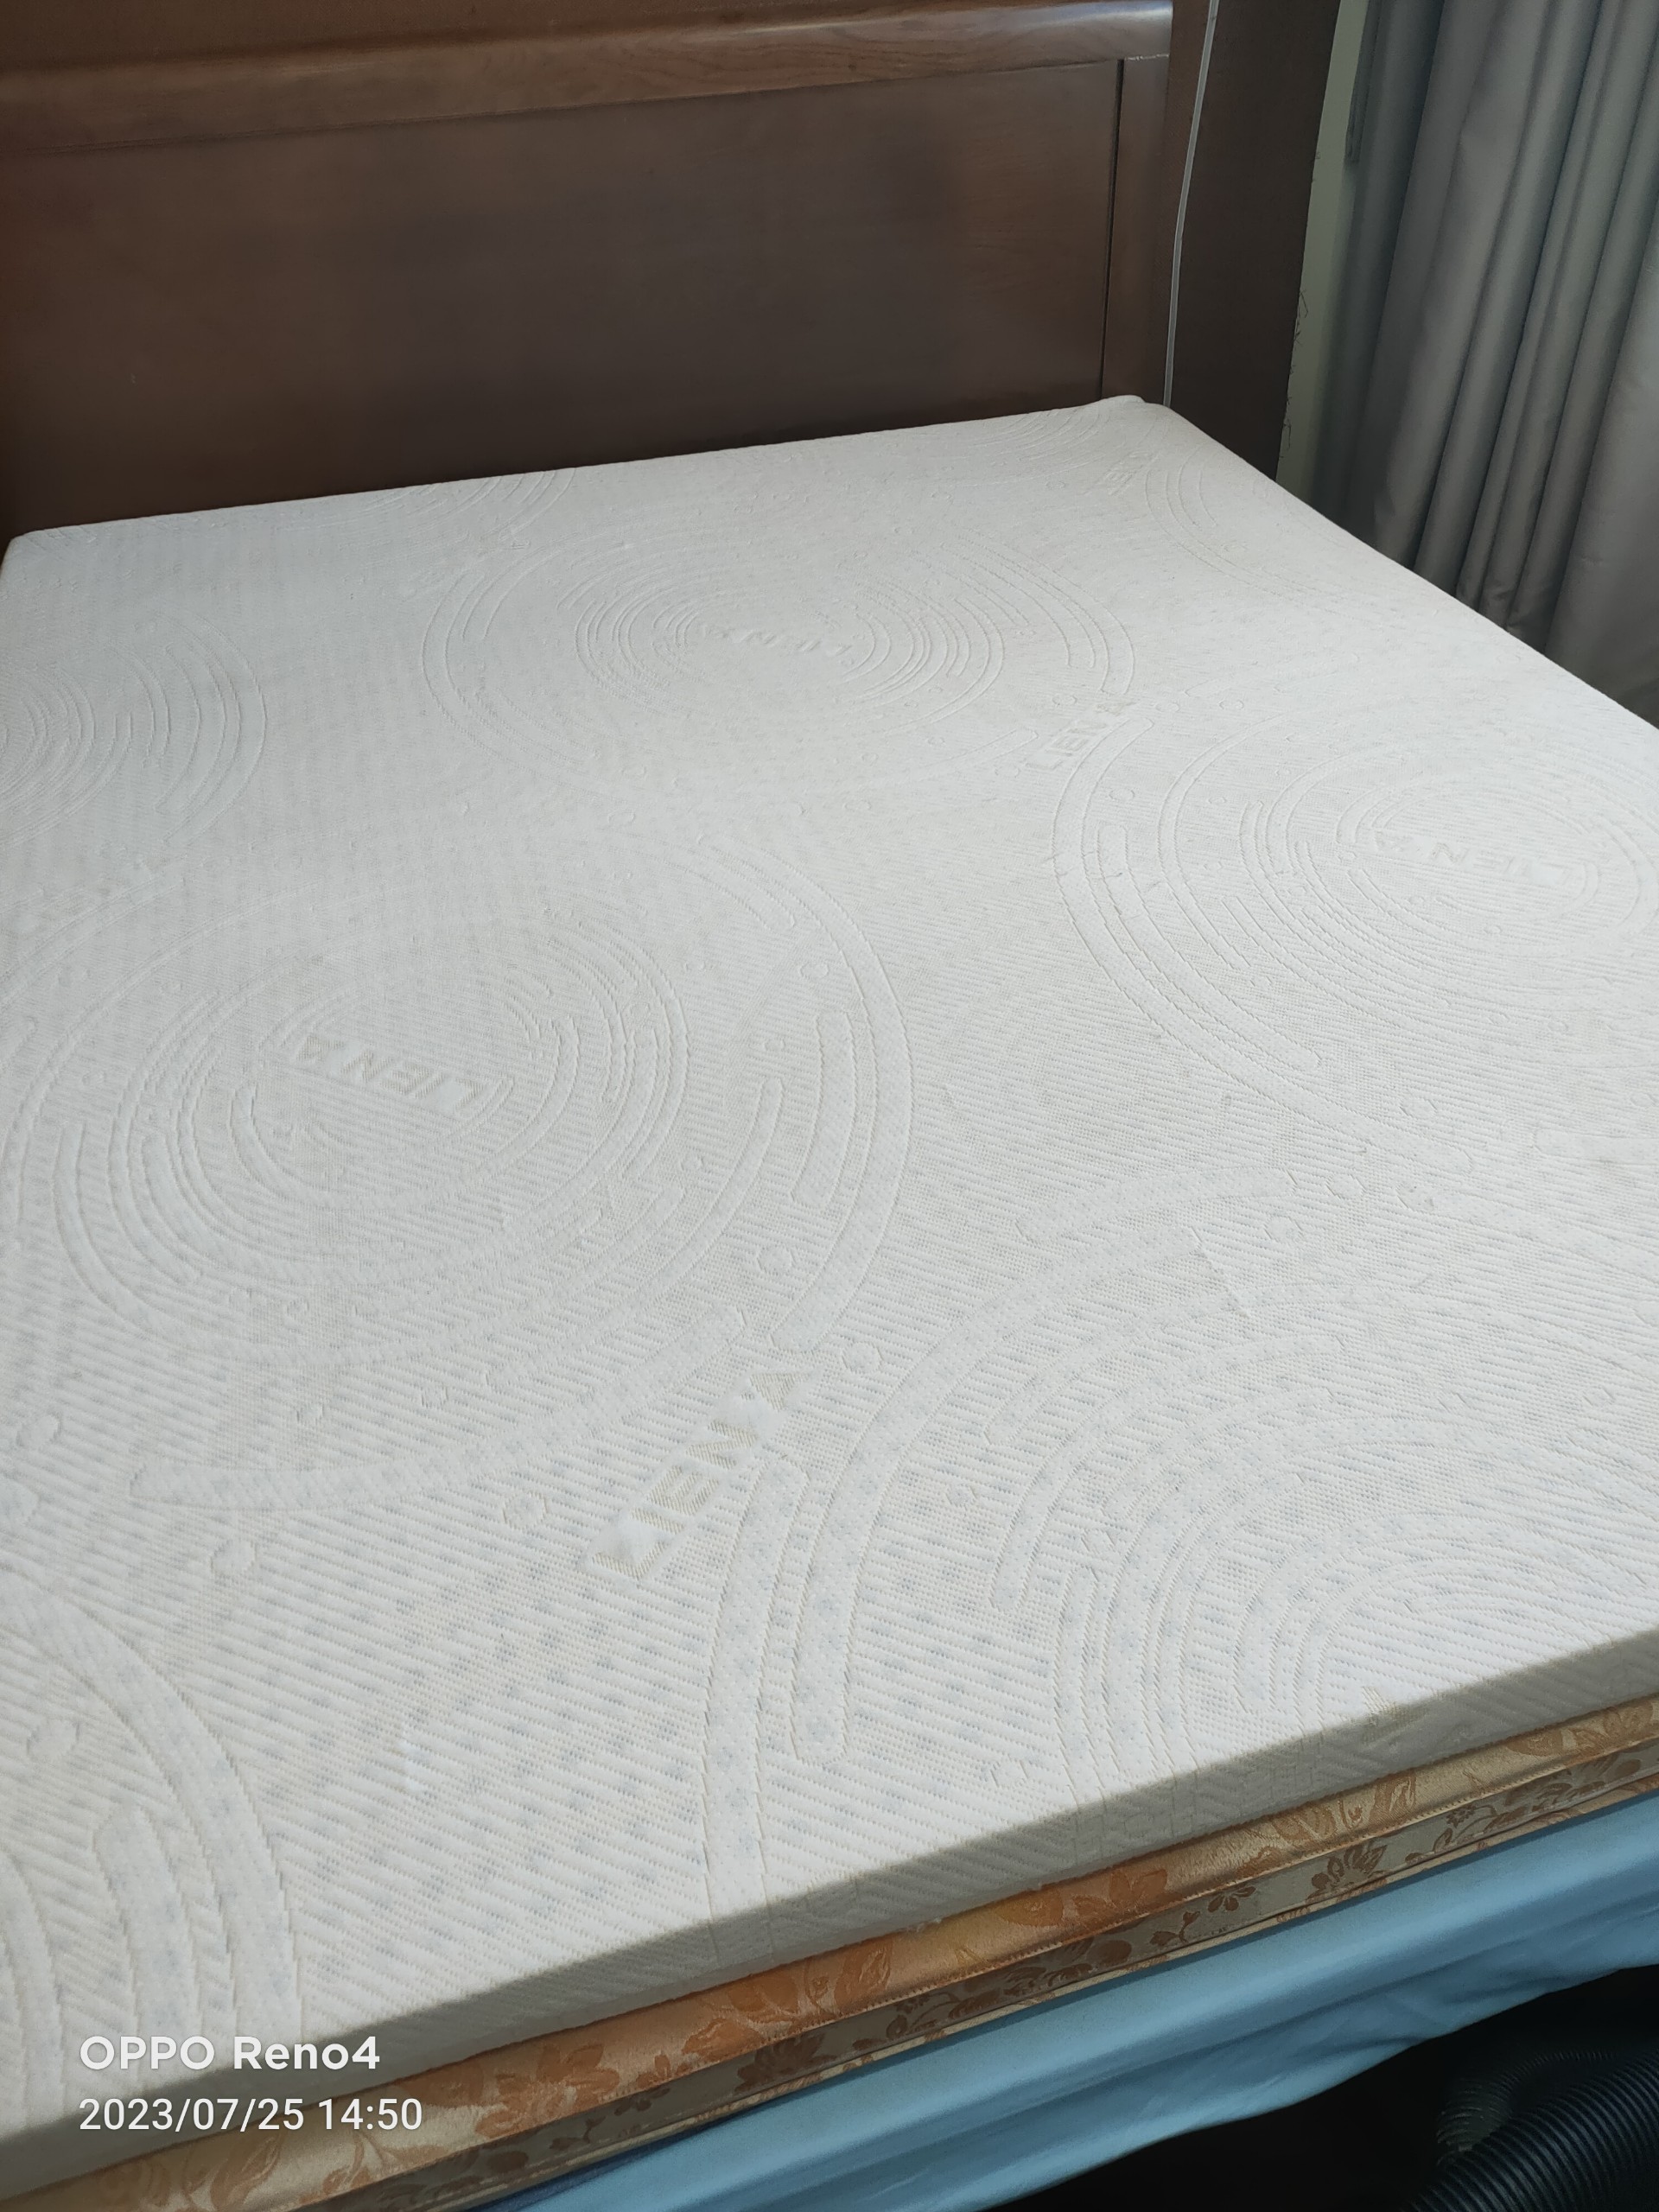 Mattress topper steam cleaning and deodorizing - cat peed